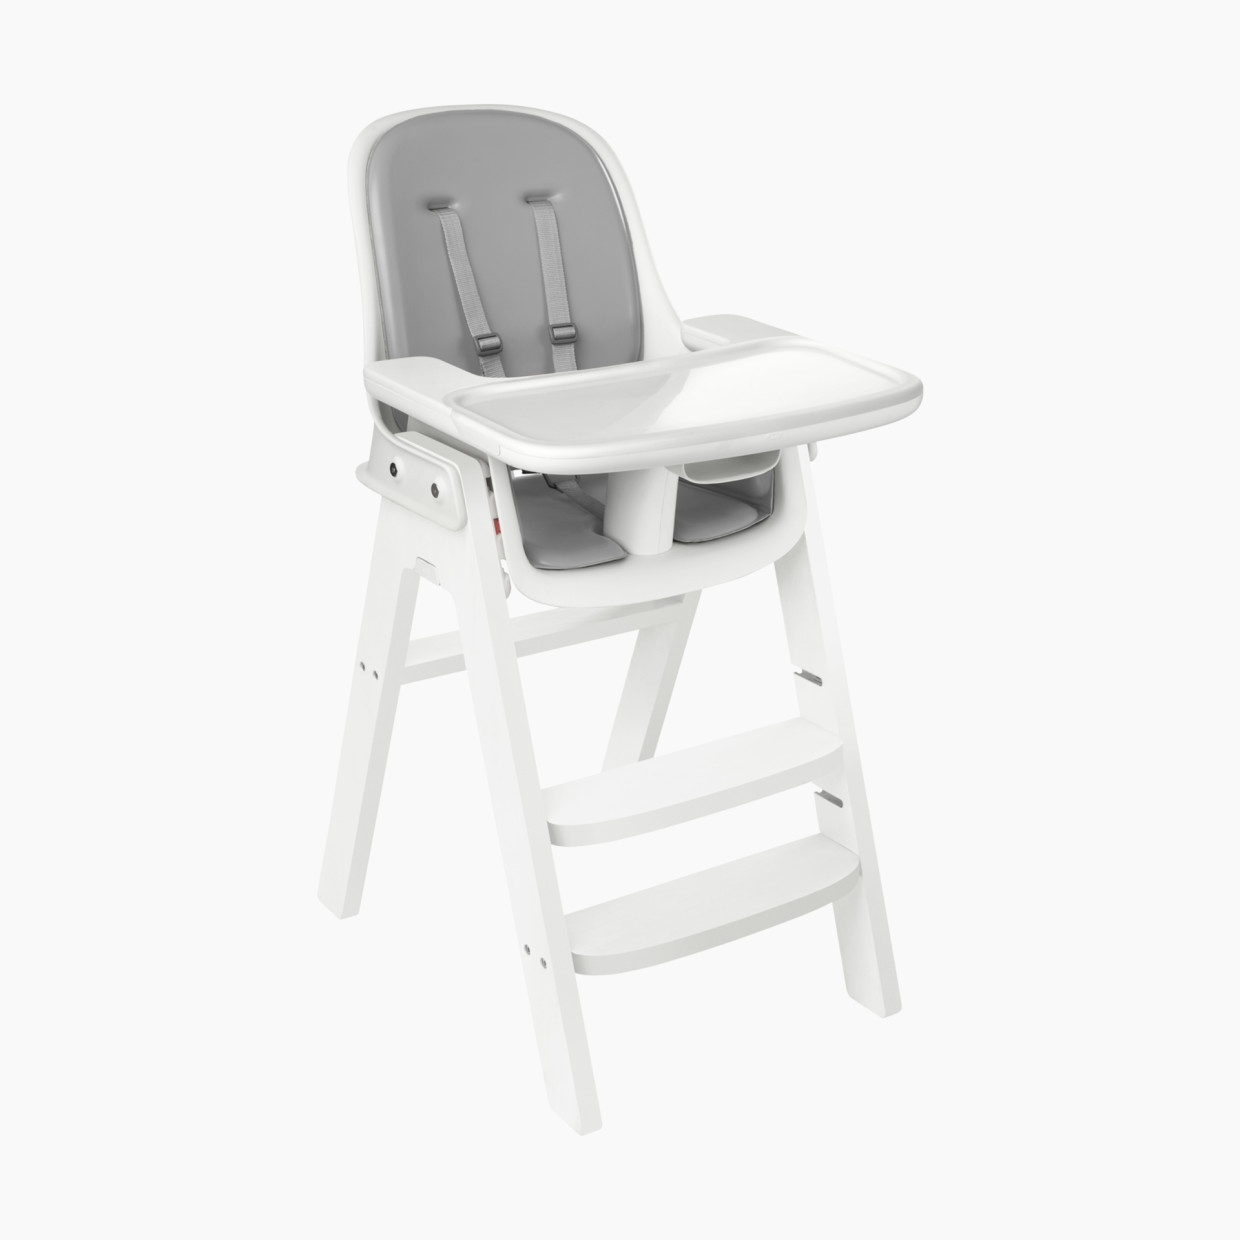 OXO Tot Sprout High Chair - Grey/White.